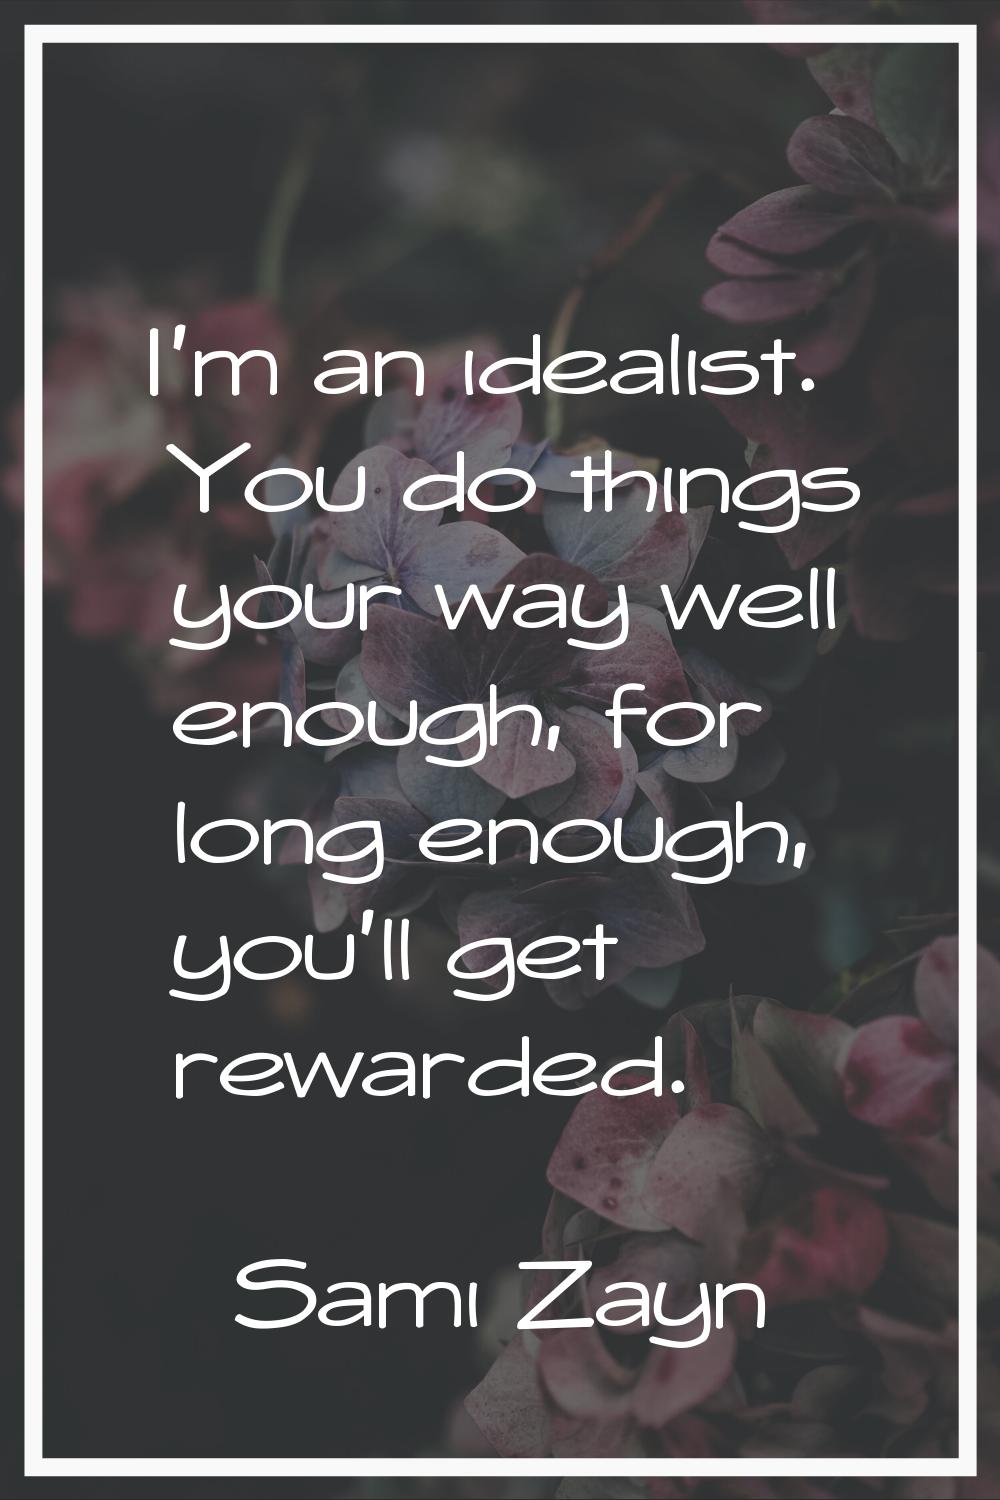 I'm an idealist. You do things your way well enough, for long enough, you'll get rewarded.